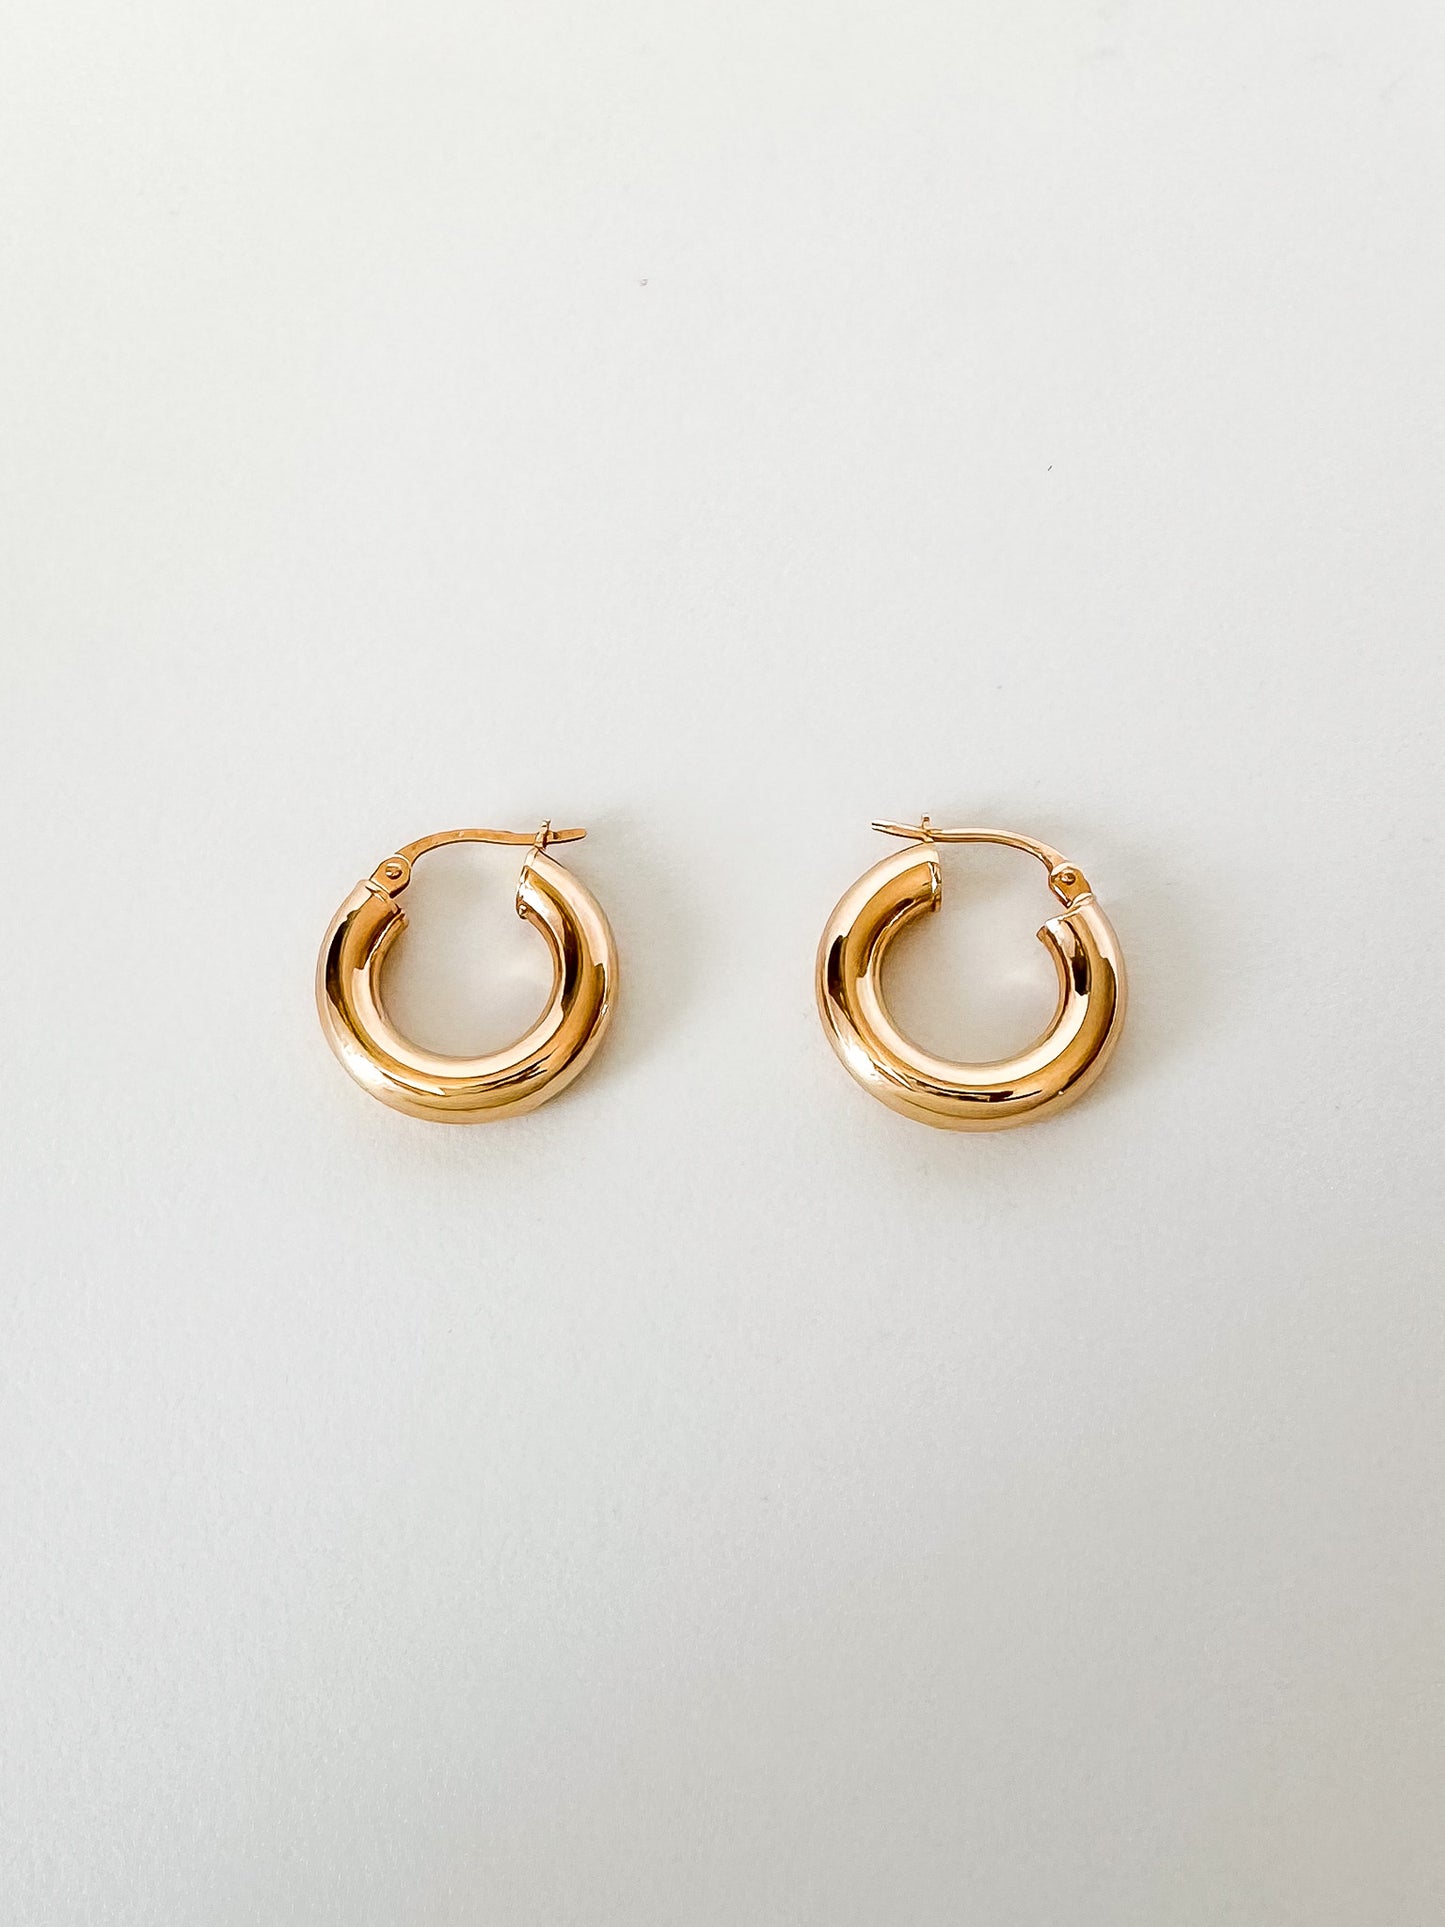 These hoop earrings are going to be your go-to choice for everyday style. With a classic 10mm size and a sturdy clasp. Bold and Durable: The thick 3.5mm tubing adds a bold touch to the design while ensuring the long-lasting durability of the earrings. Precious Metal: Crafted from 9ct yellow gold and stamped with authenticity (375)